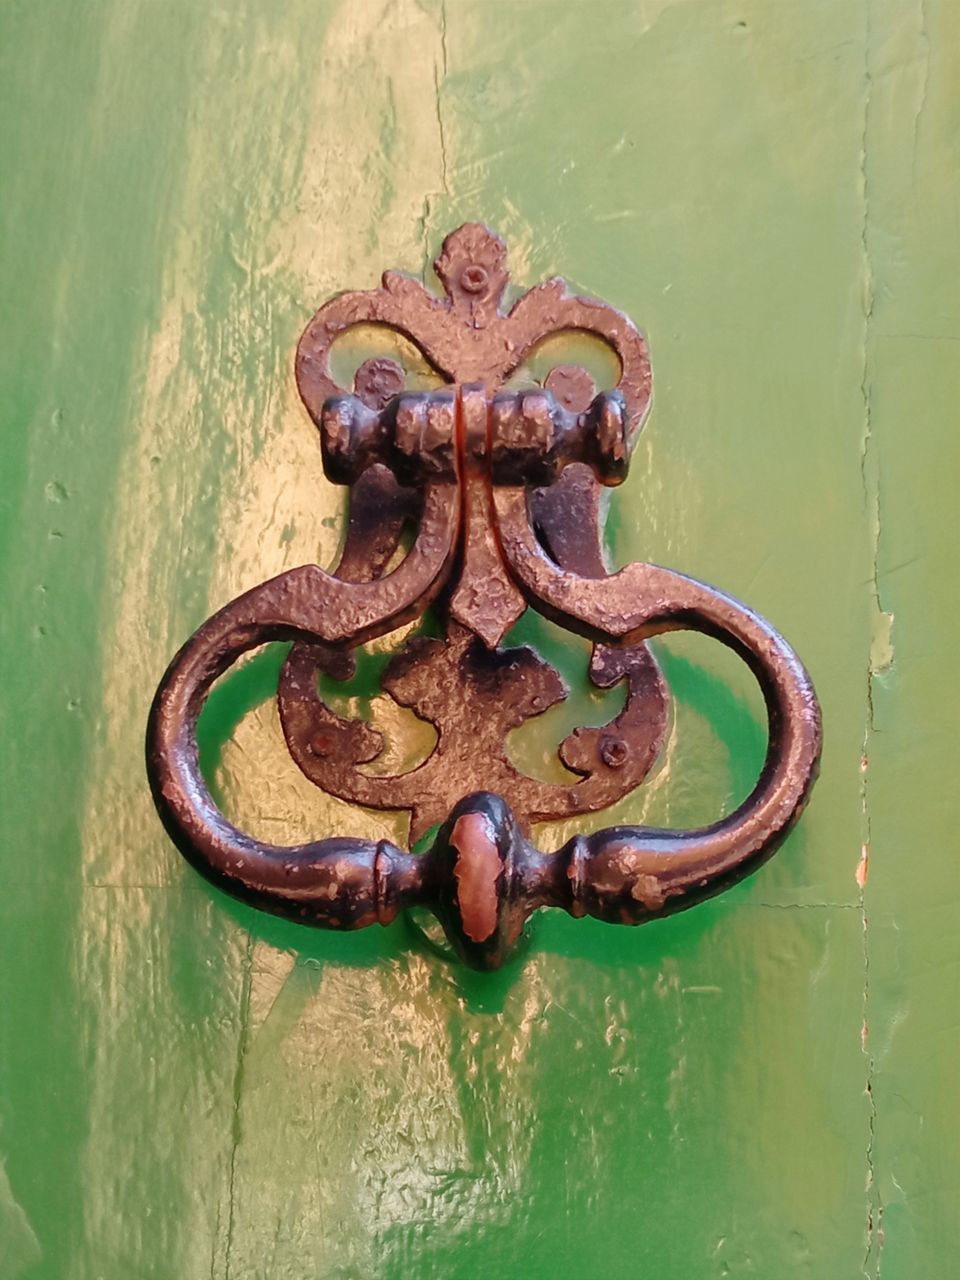 metal, rusty, green, no people, door knocker, door, day, entrance, close-up, old, water, protection, security, outdoors, nature, animal